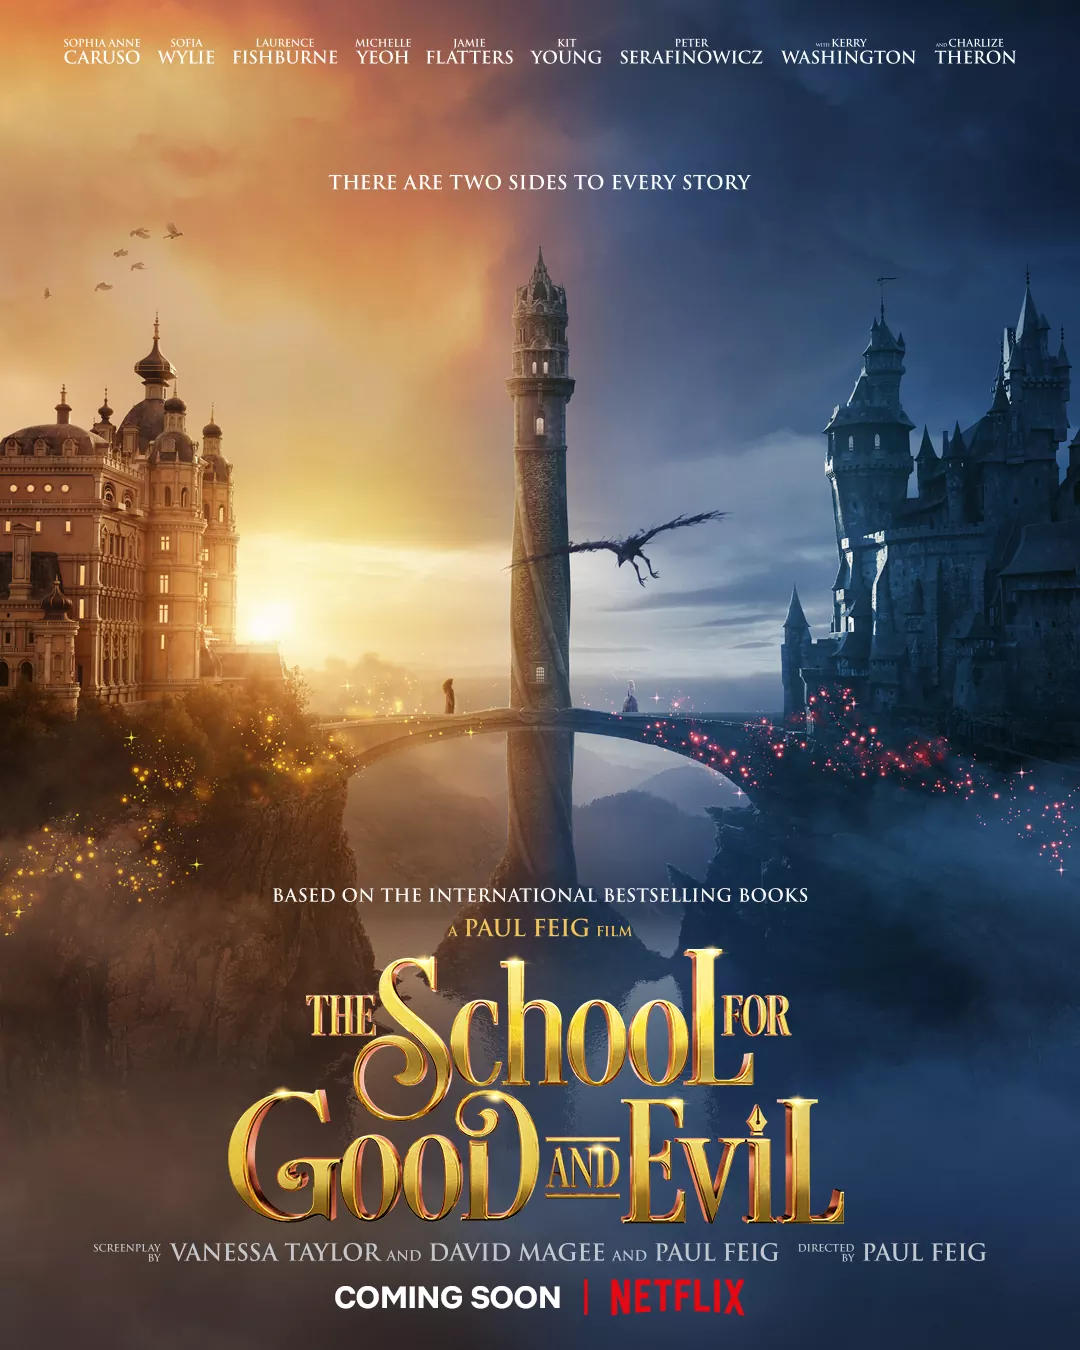 Trailer Από Το "The School for Good and Evil"